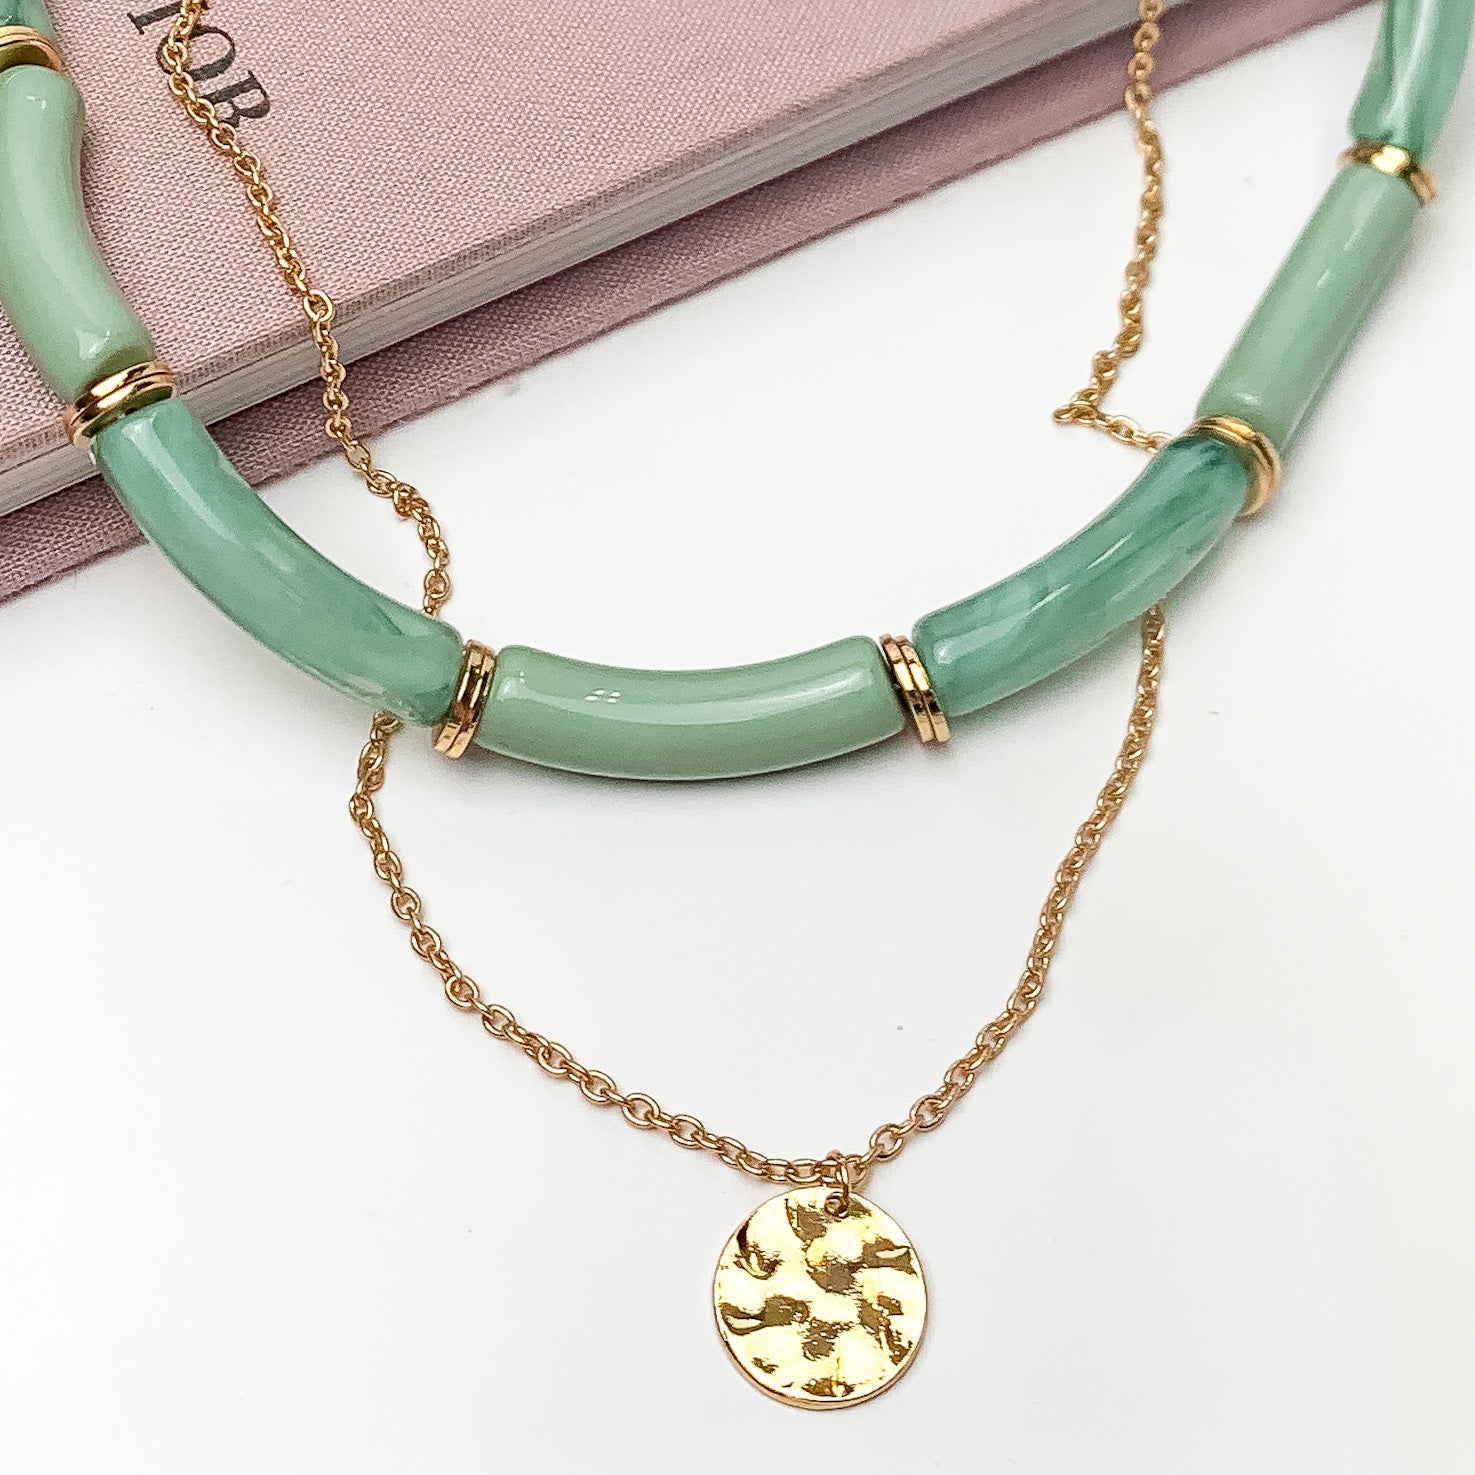 Perfect Paradise Tube Necklace With Second Gold Tone Chain Necklace in Greene. Pictured on a white background with the necklace laying on a book.